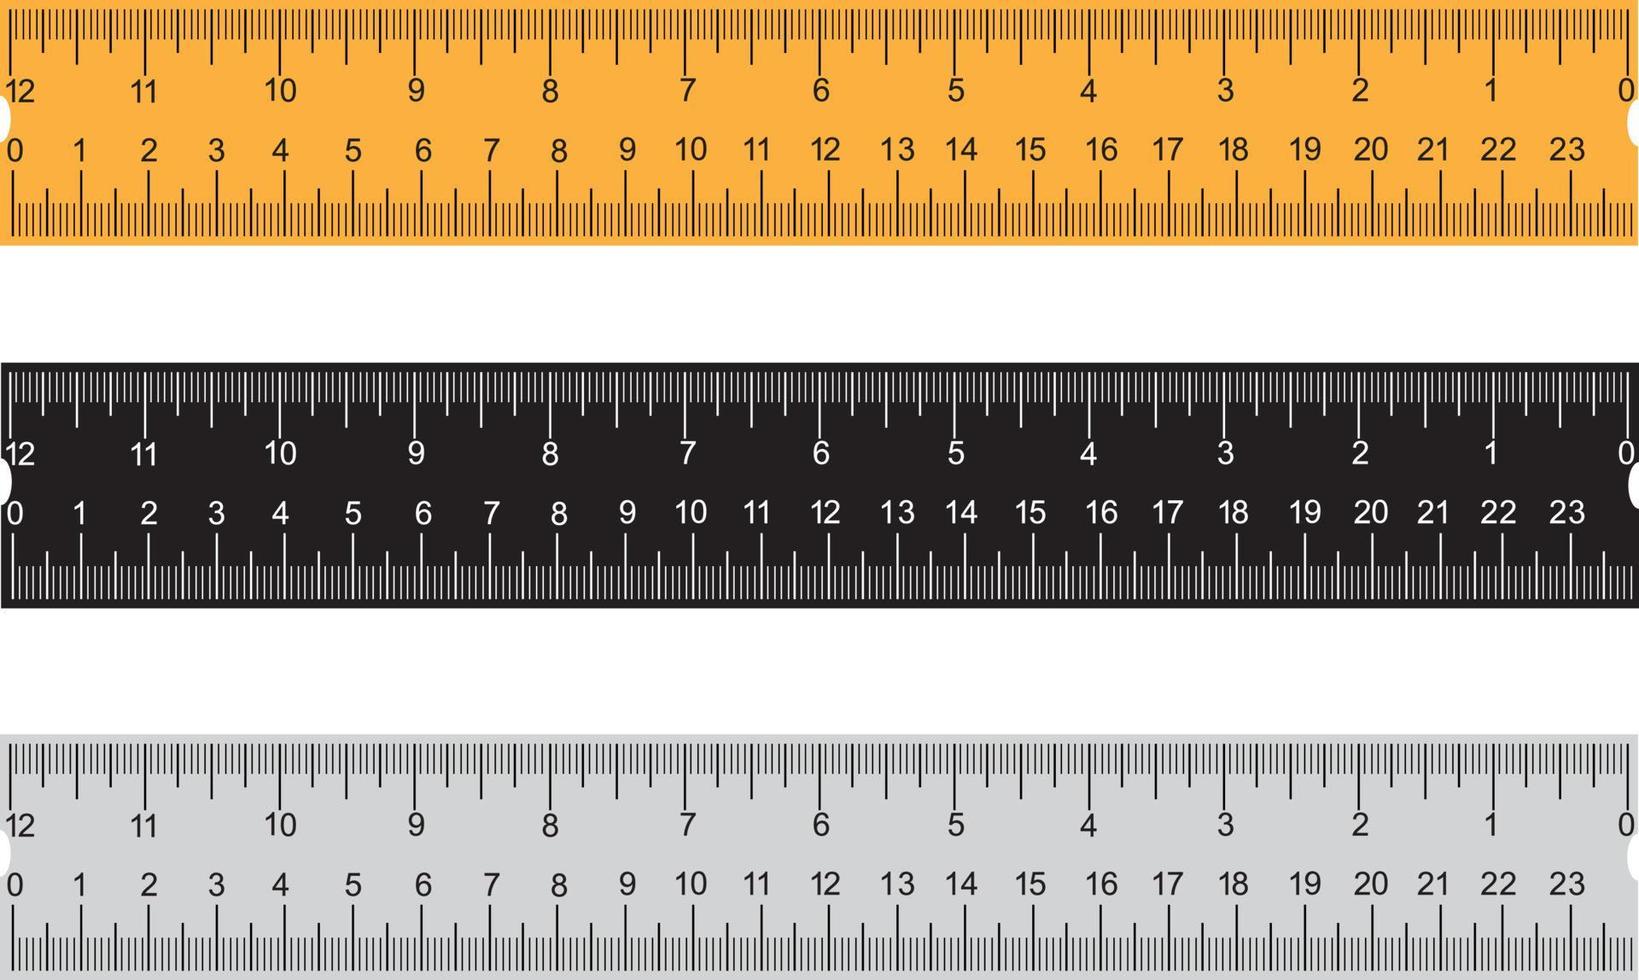 Set of three rulers on transparent background. Plastic yellow